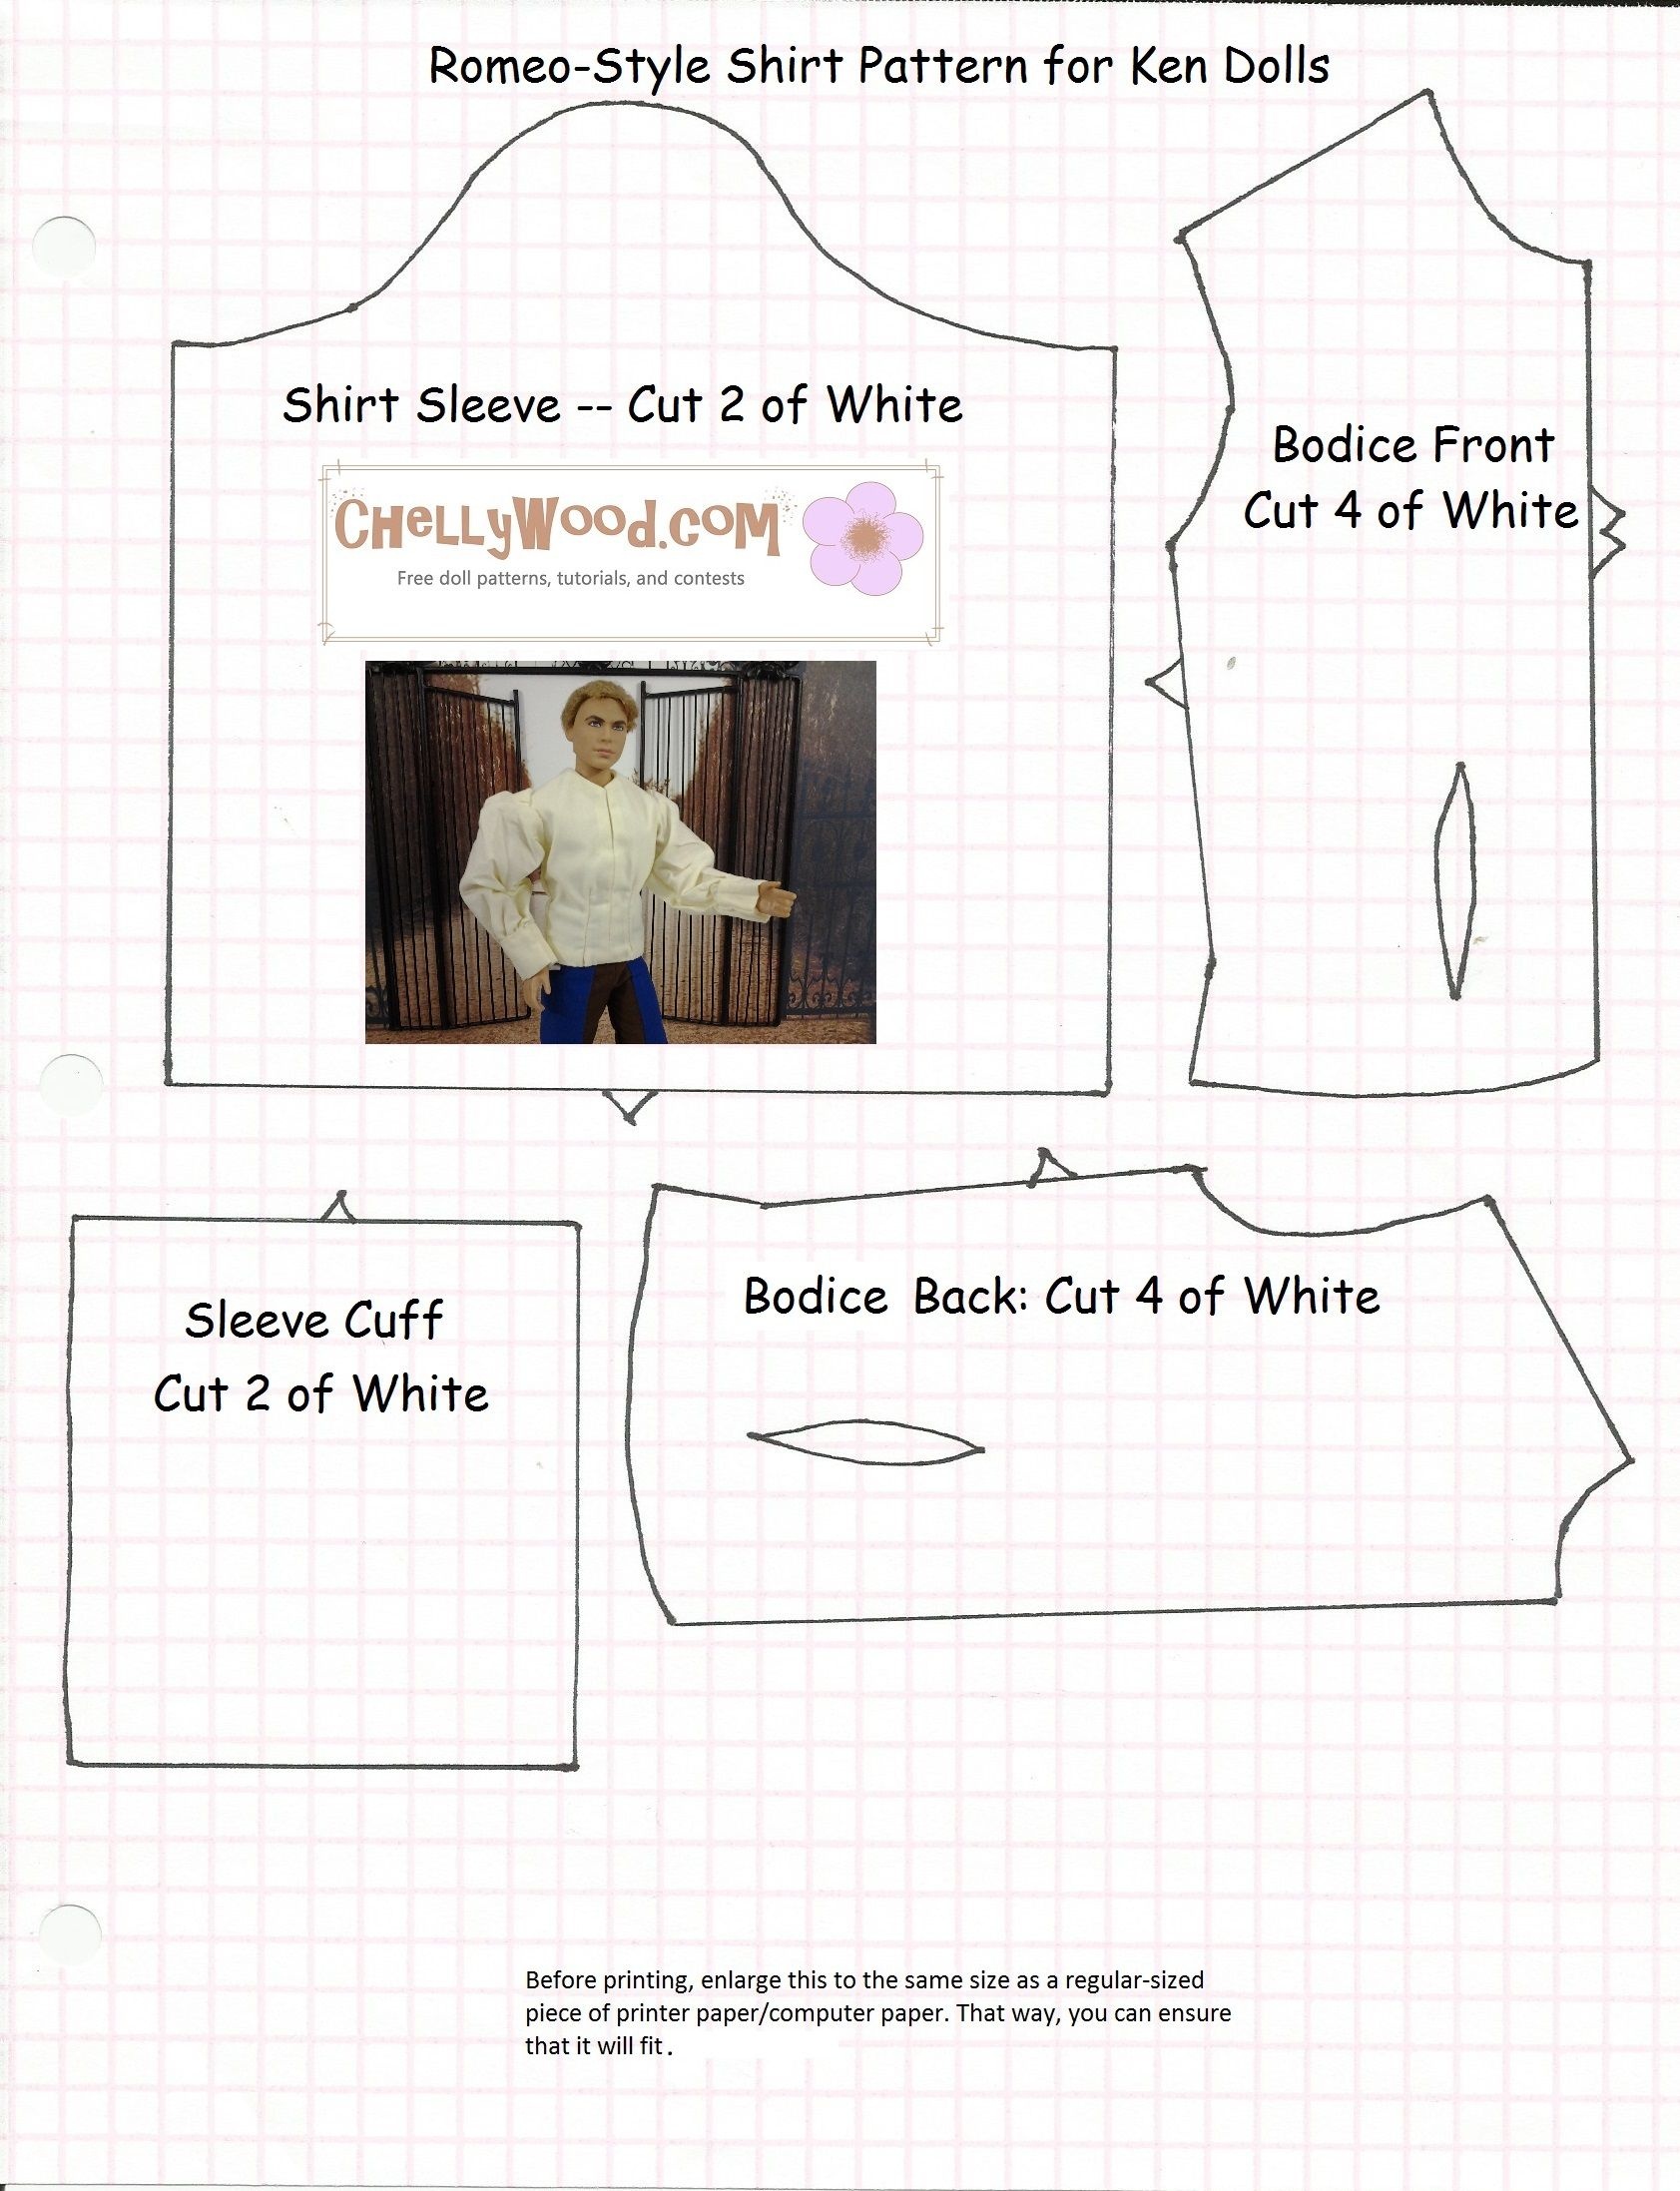 Lots Of Free Printable Patterns Like This One At Chellywood - Ken Clothes Patterns Free Printable